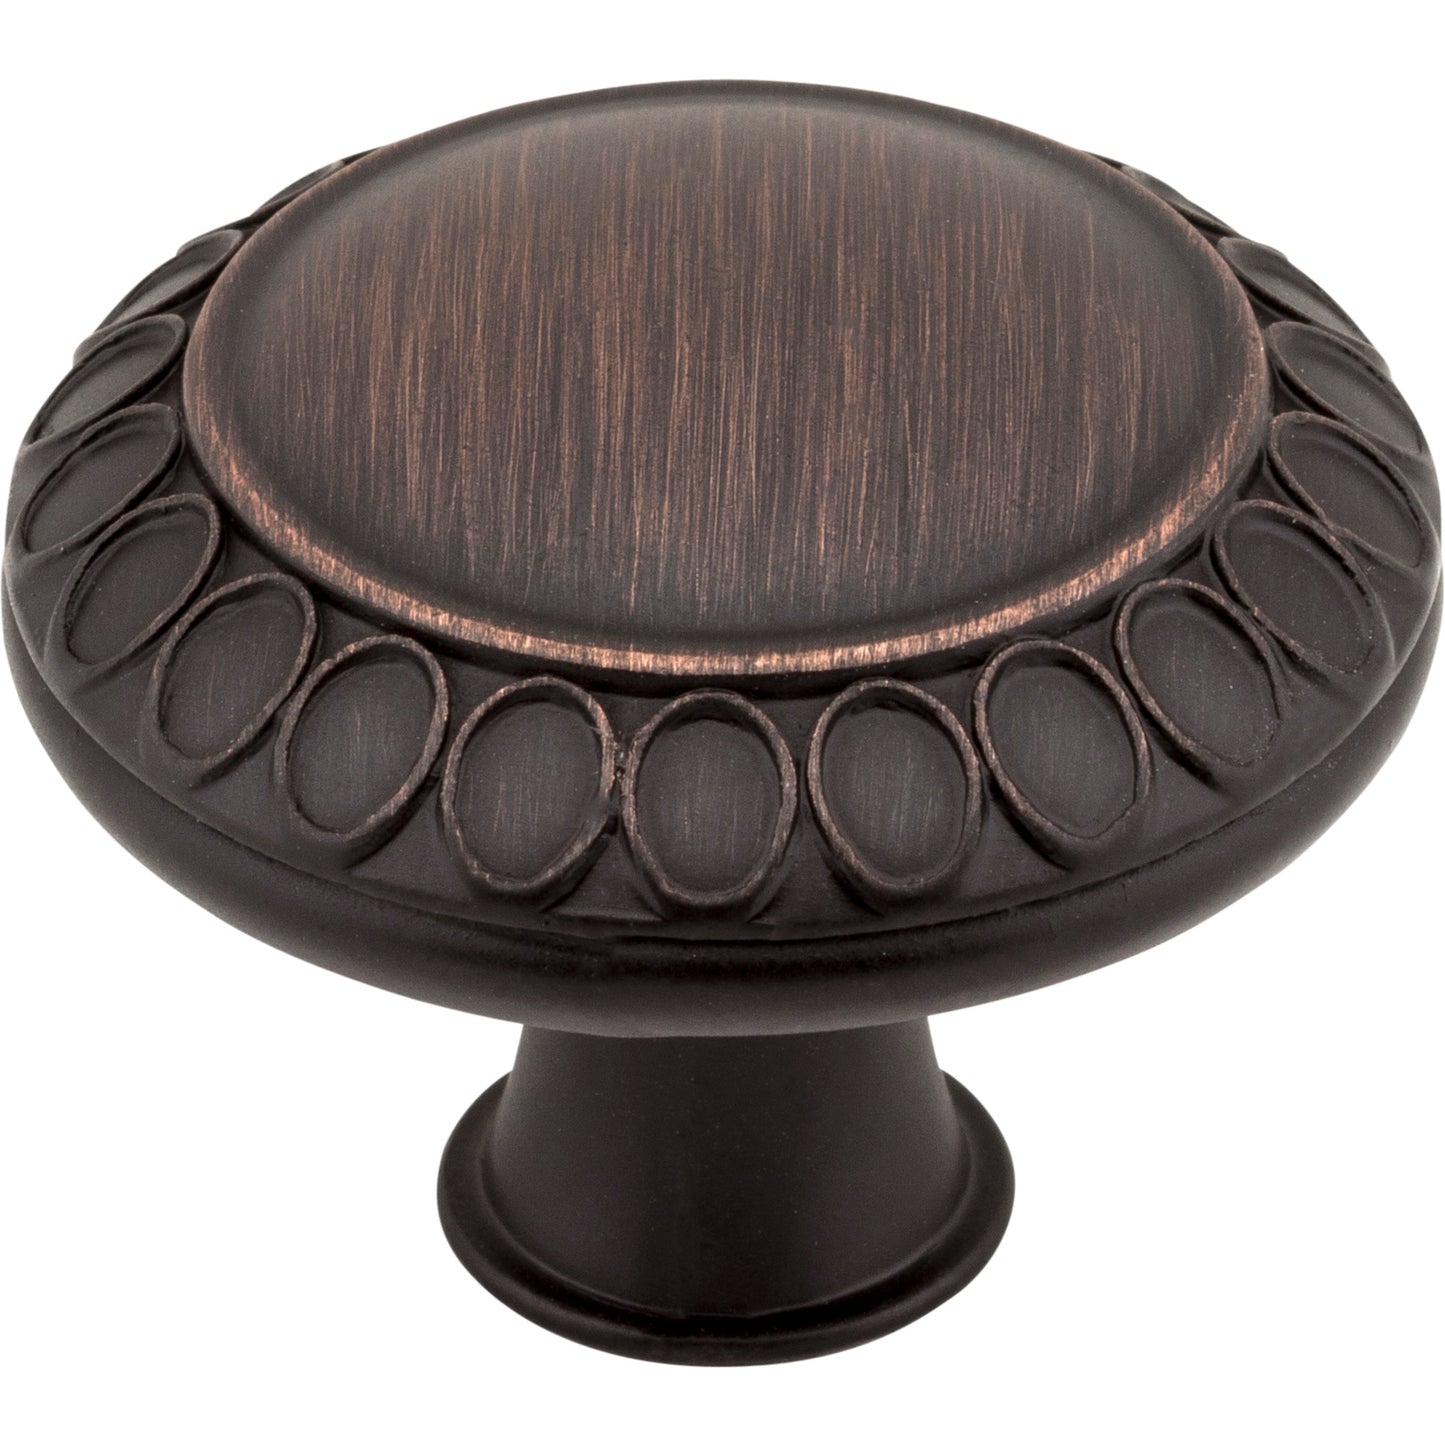 JEFFREY ALEXANDER 1977S-DBAC 1-3/8" Overall Length  Brushed Oil Rubbed Bronze Symphony Cabinet Knob